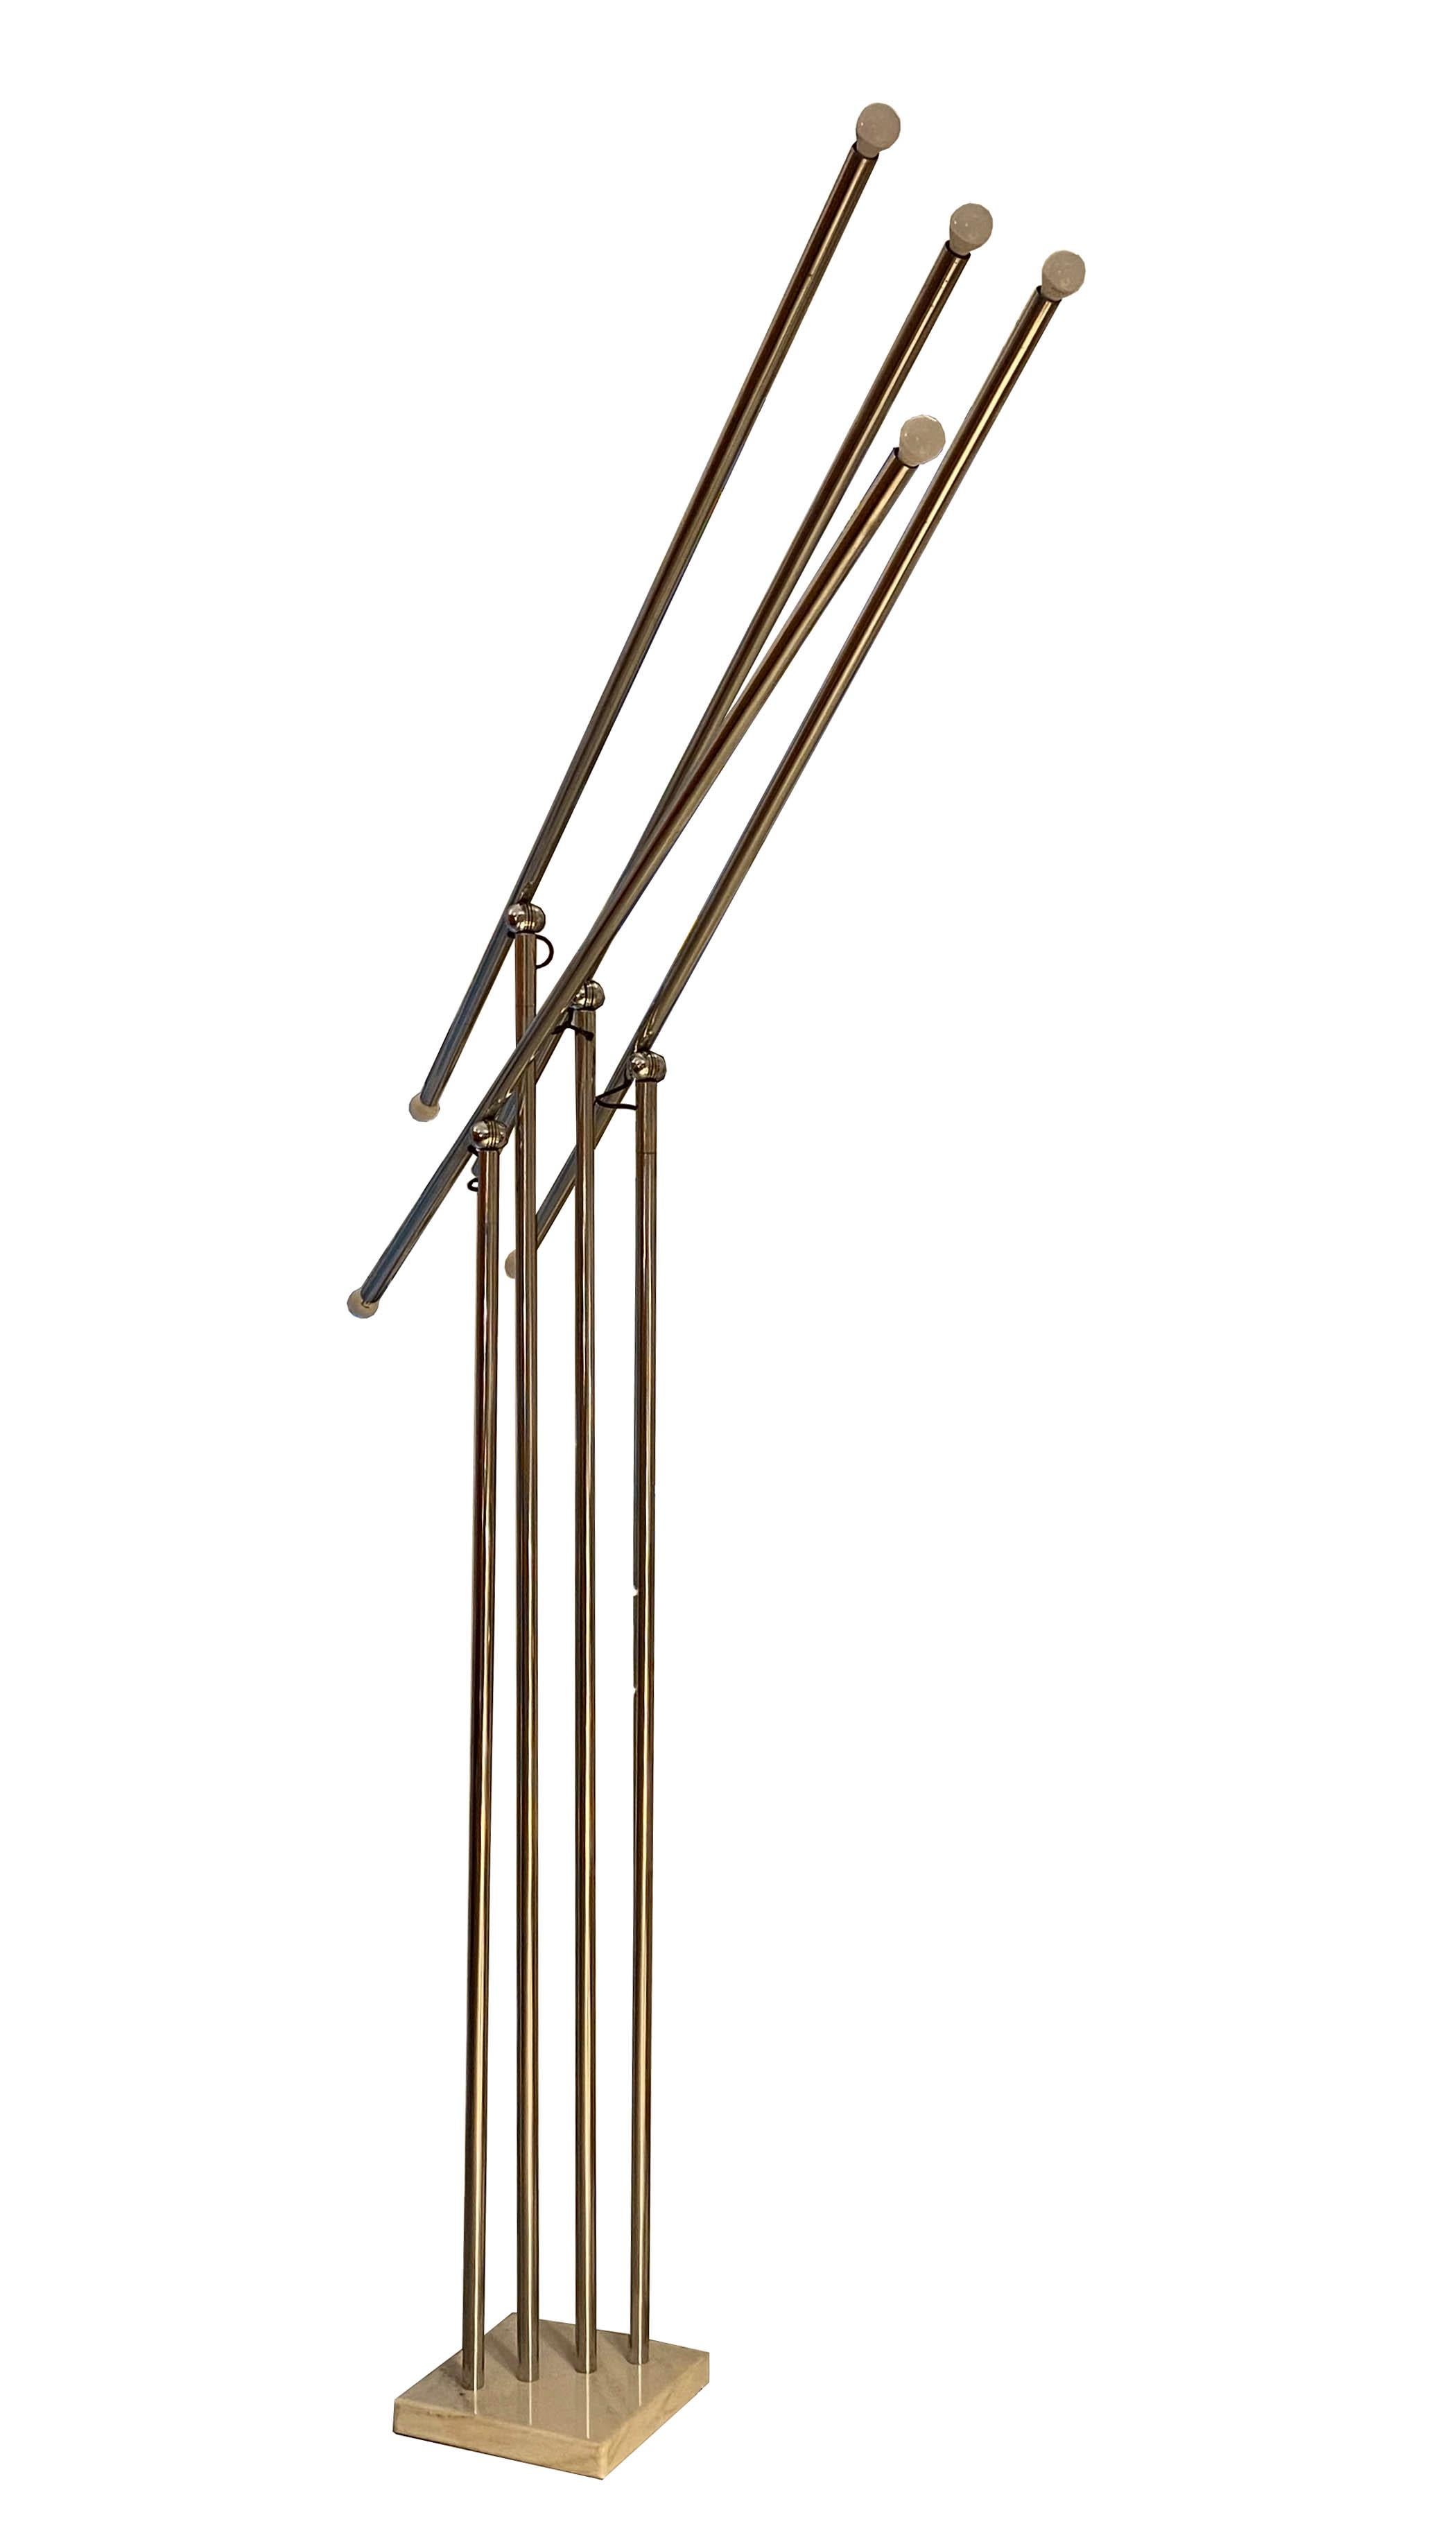 Sergio Moscheni, Important floor lamp, Selenova production, 1972.
Consisting of tubular elements of various heights adjustable in every direction, chrome-plated frame, square-section base in white marble.
Notes
Reference bibliography: 'Mettiamo su